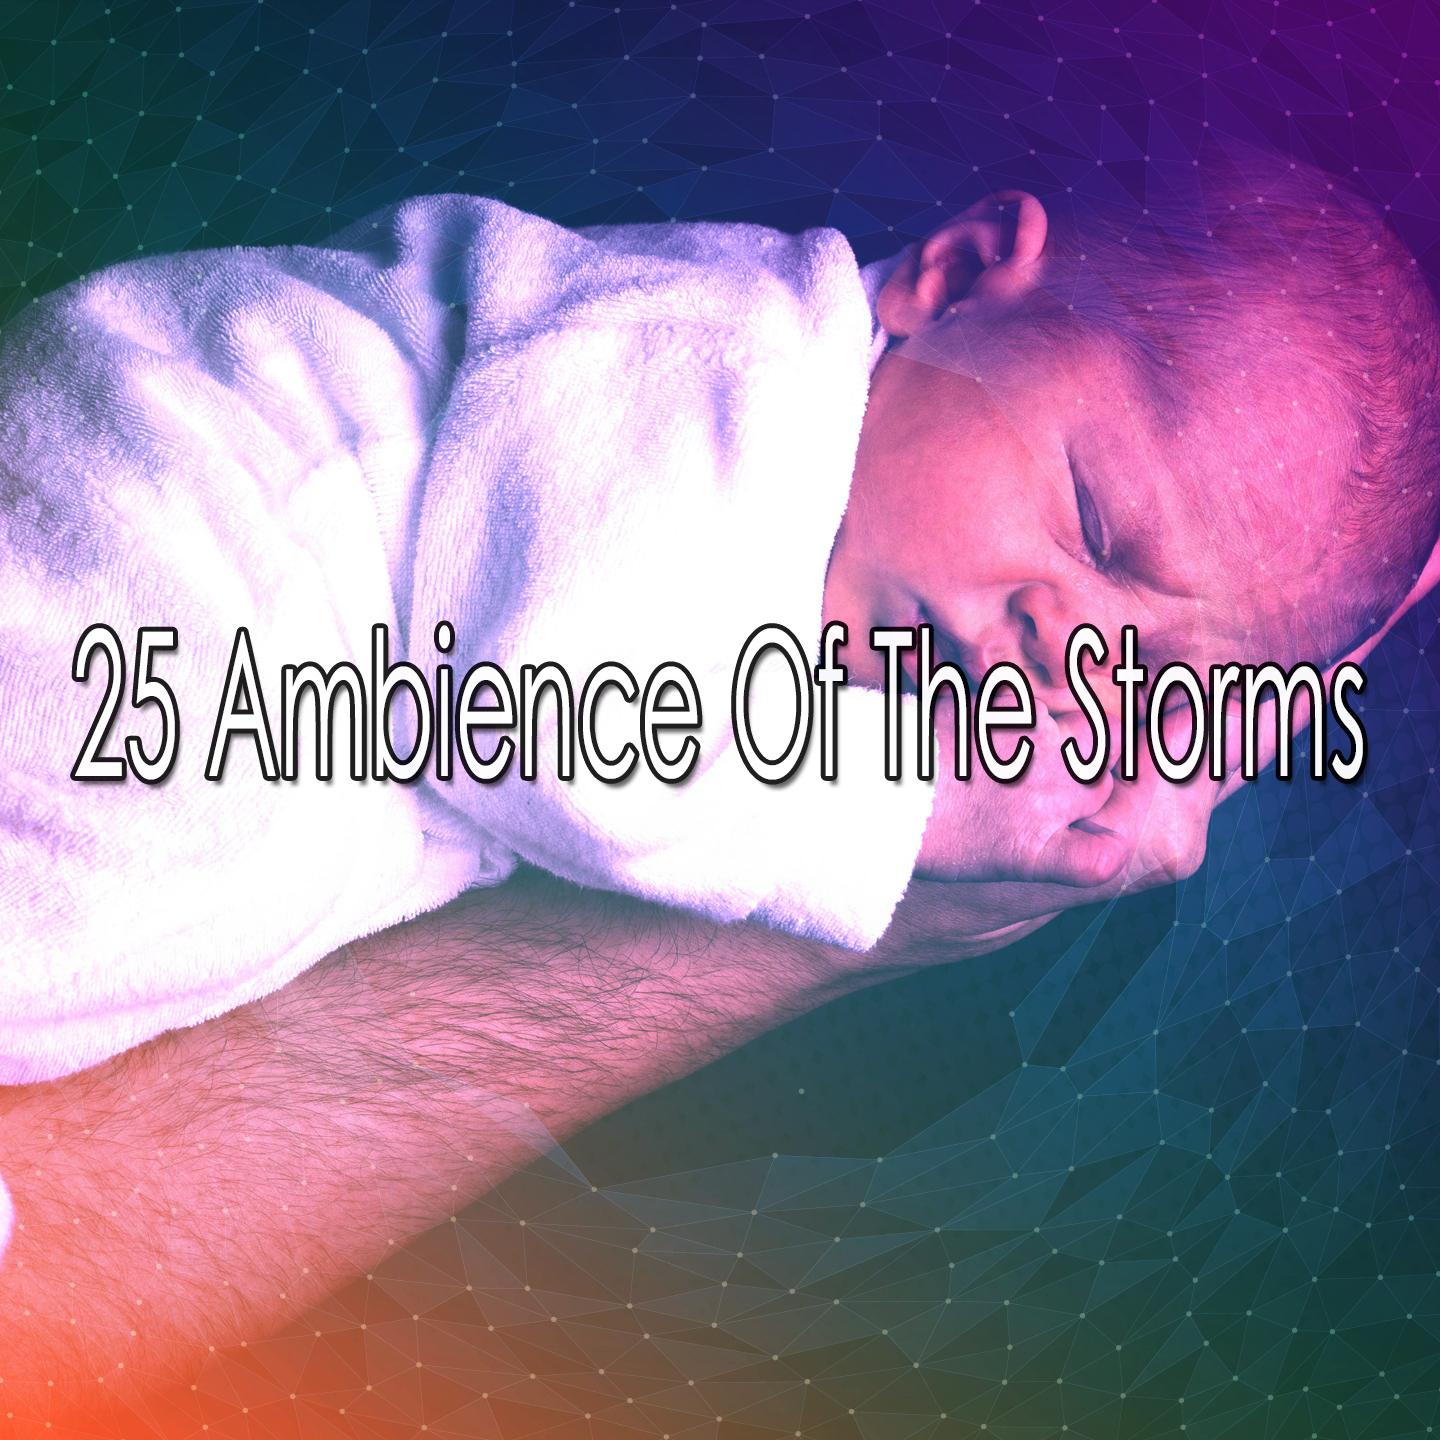 25 Ambience Of The Storms